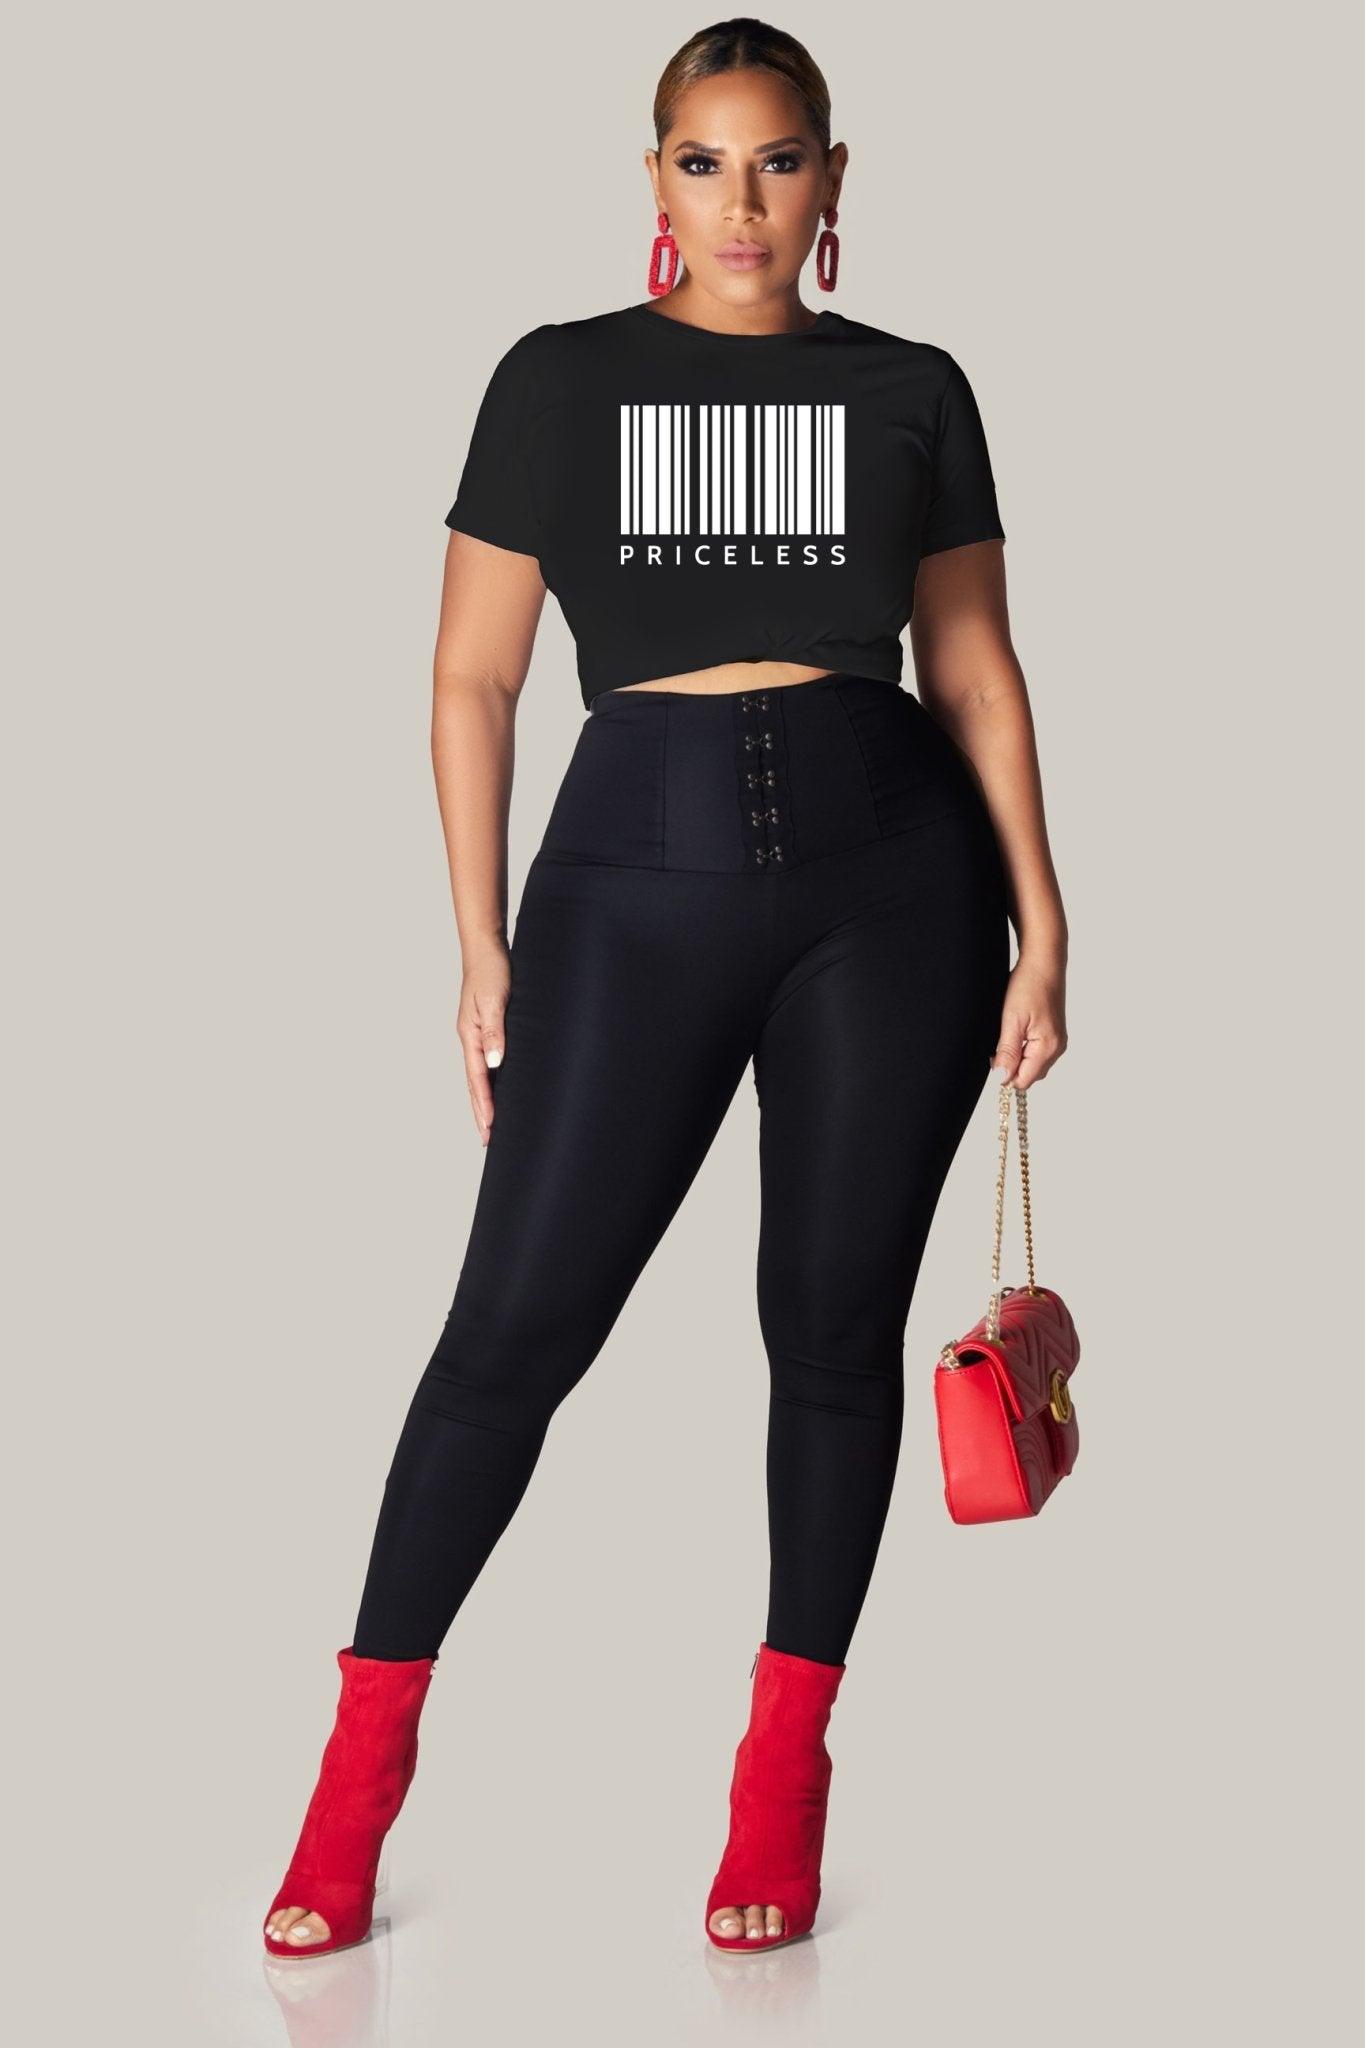 Priceless Unisex Jersey Tee: Embrace Your Worth and Empowerment - MY SEXY STYLES